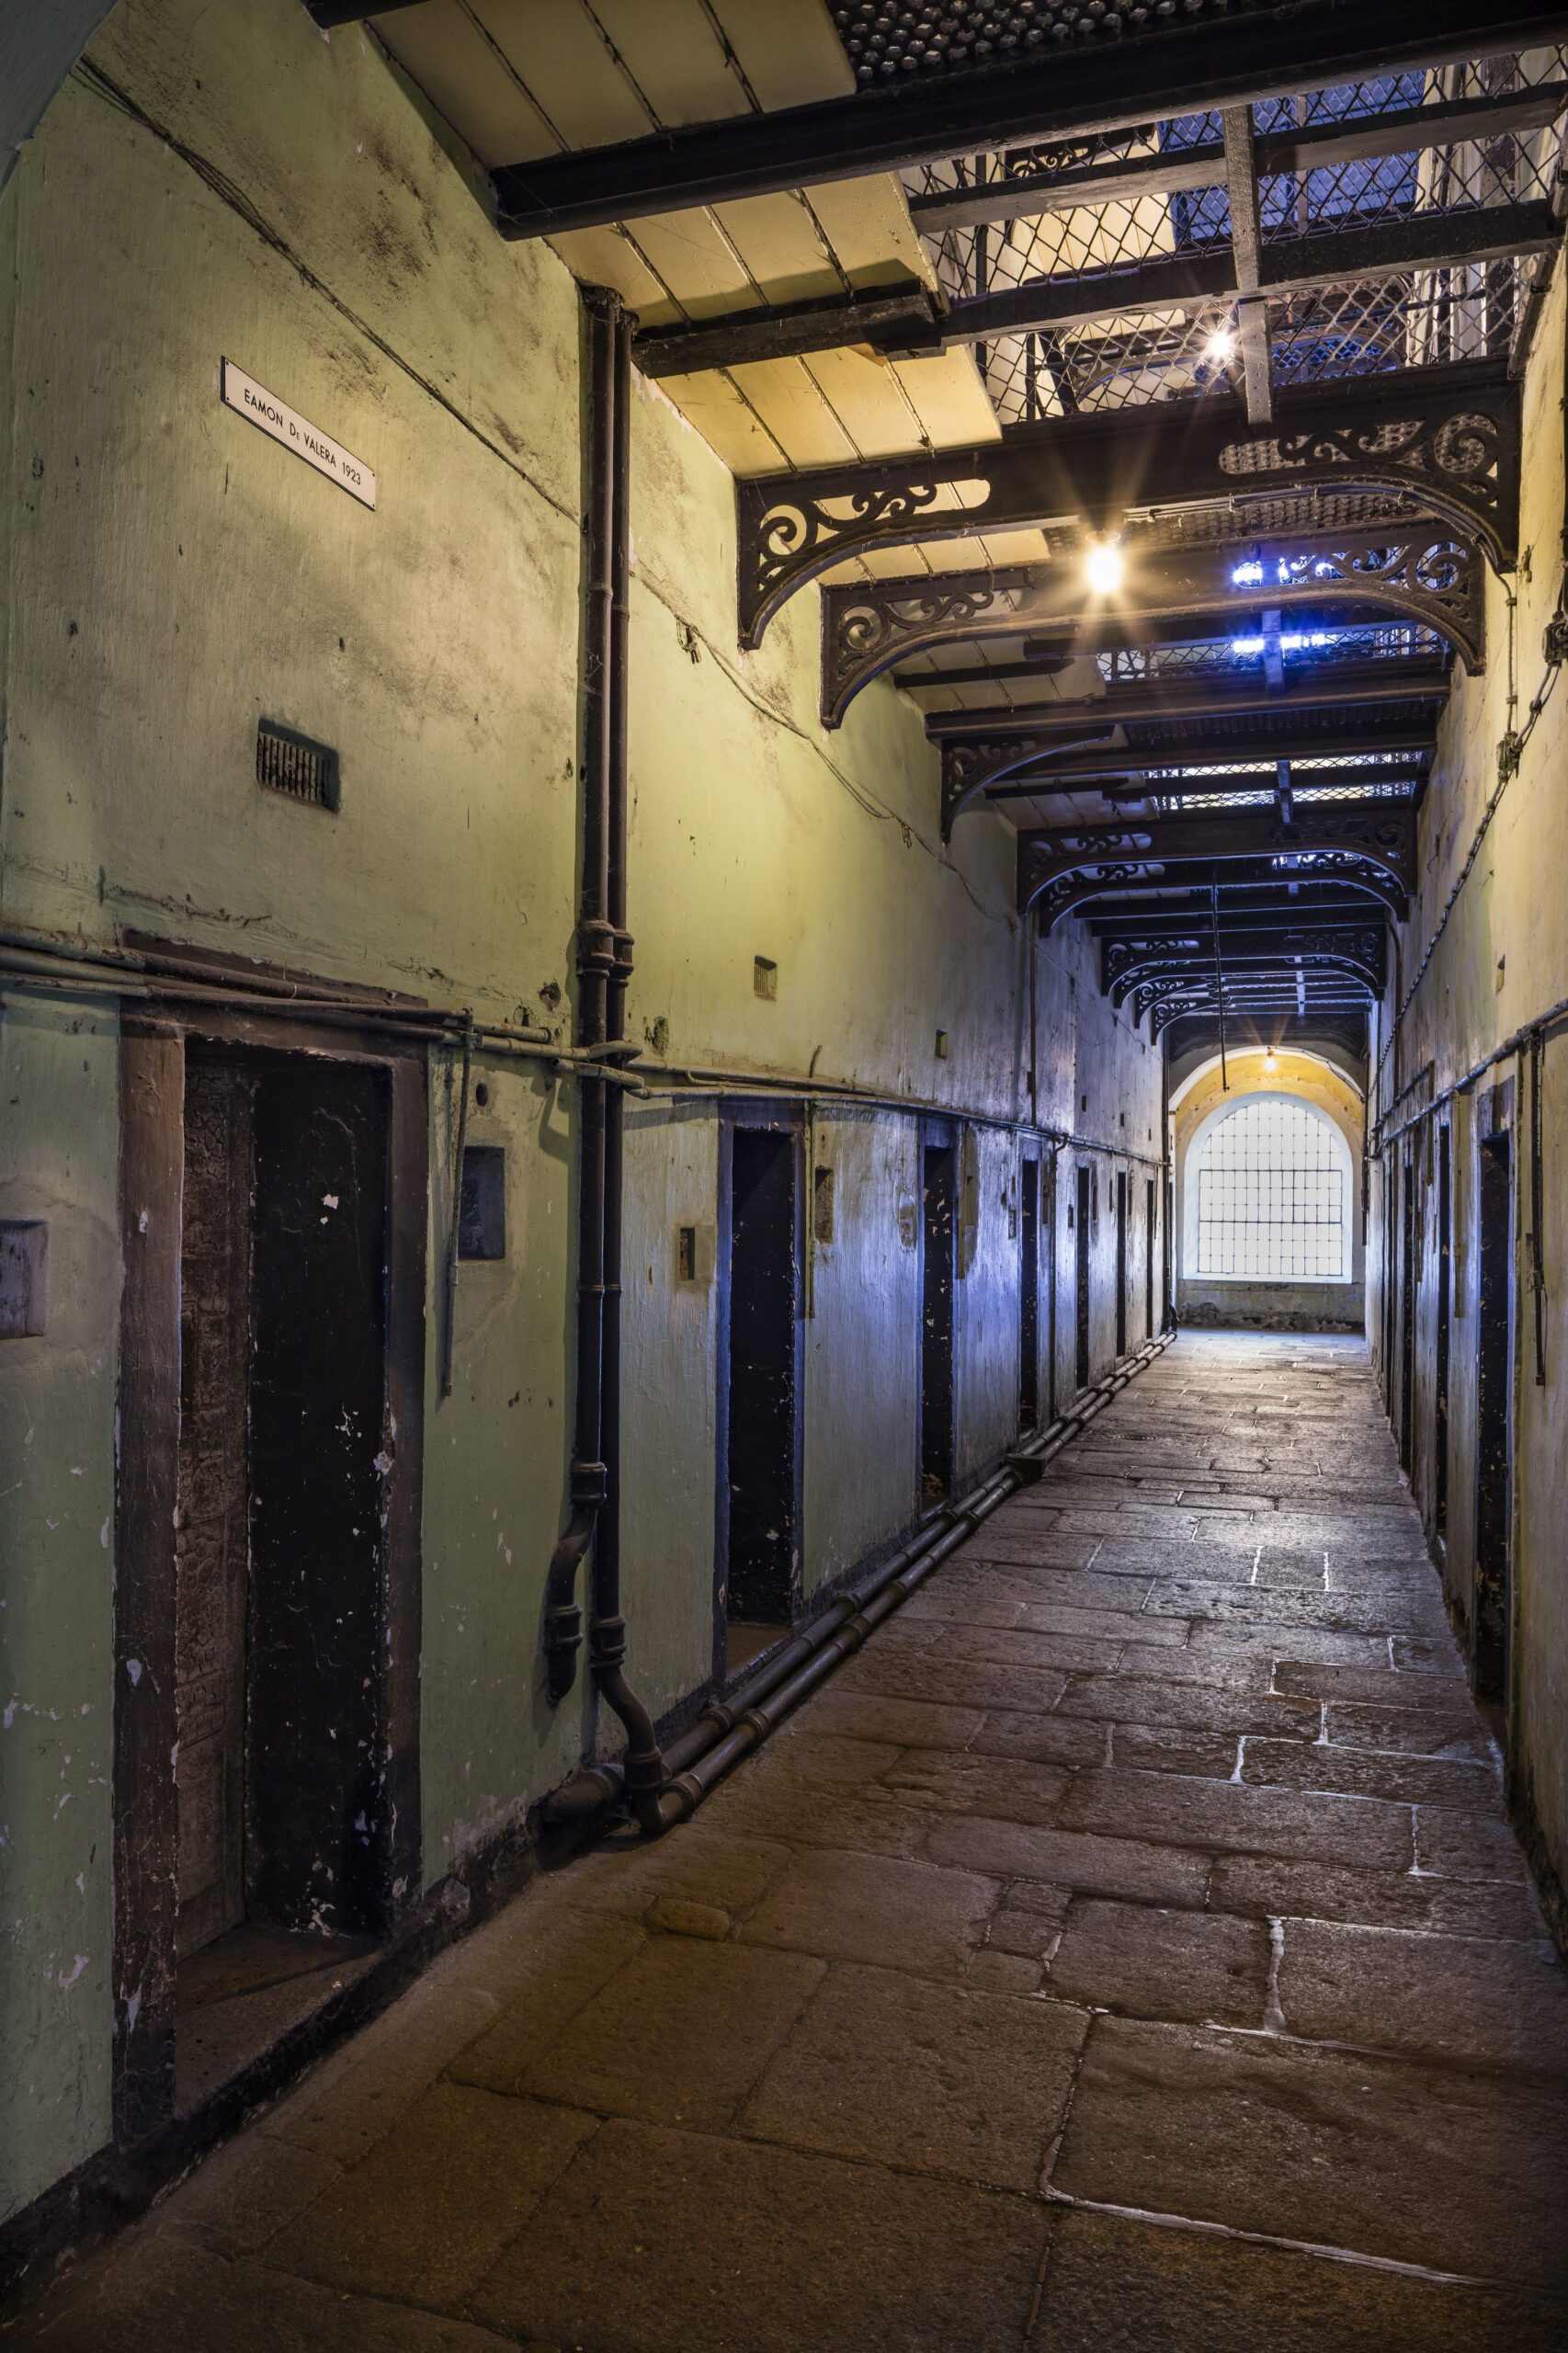 Interior of prison building displaying corridor with cell doors